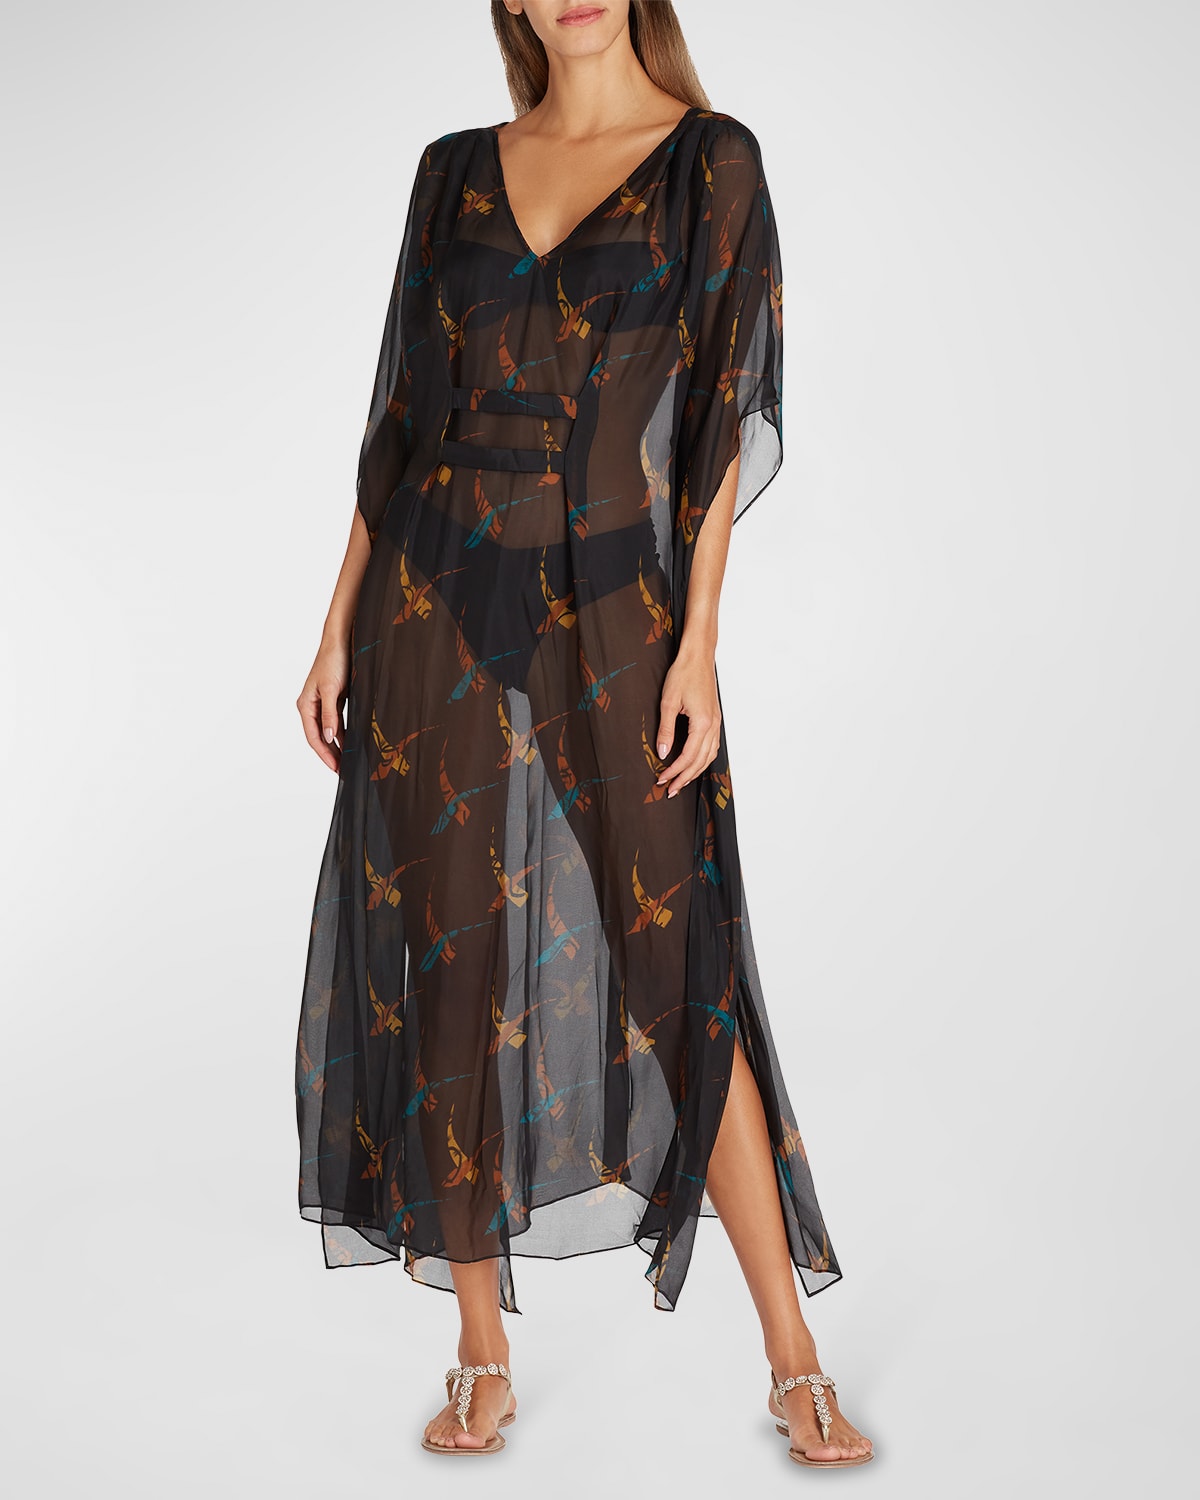 VALIMARE FLORENCE MAXI CAFTAN COVERUP